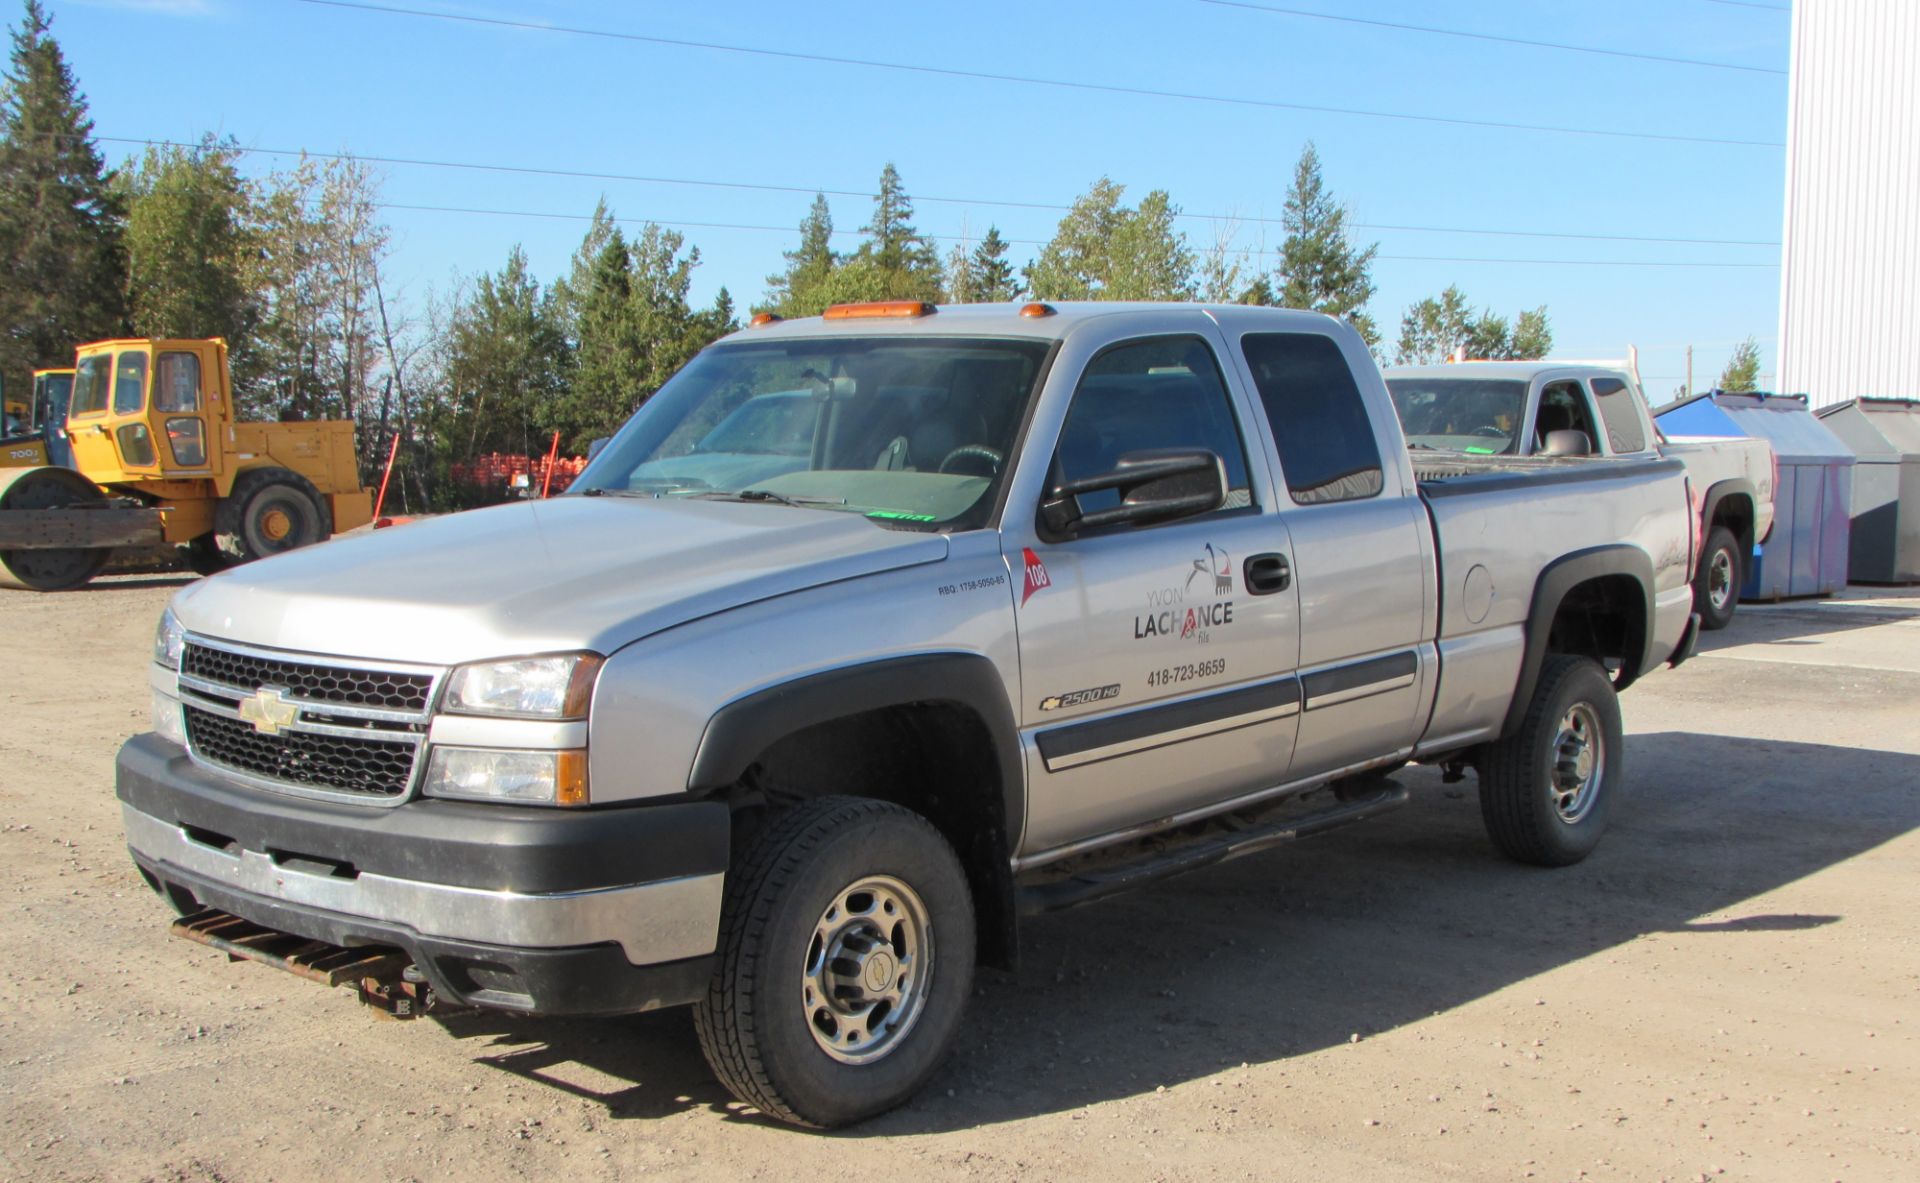 2007 CHEVY SILVERADO 2500HD PICK UP C/W EXTENDED CAB, 4X4, APPROX. 197,000KM (SHOWING ON METER)